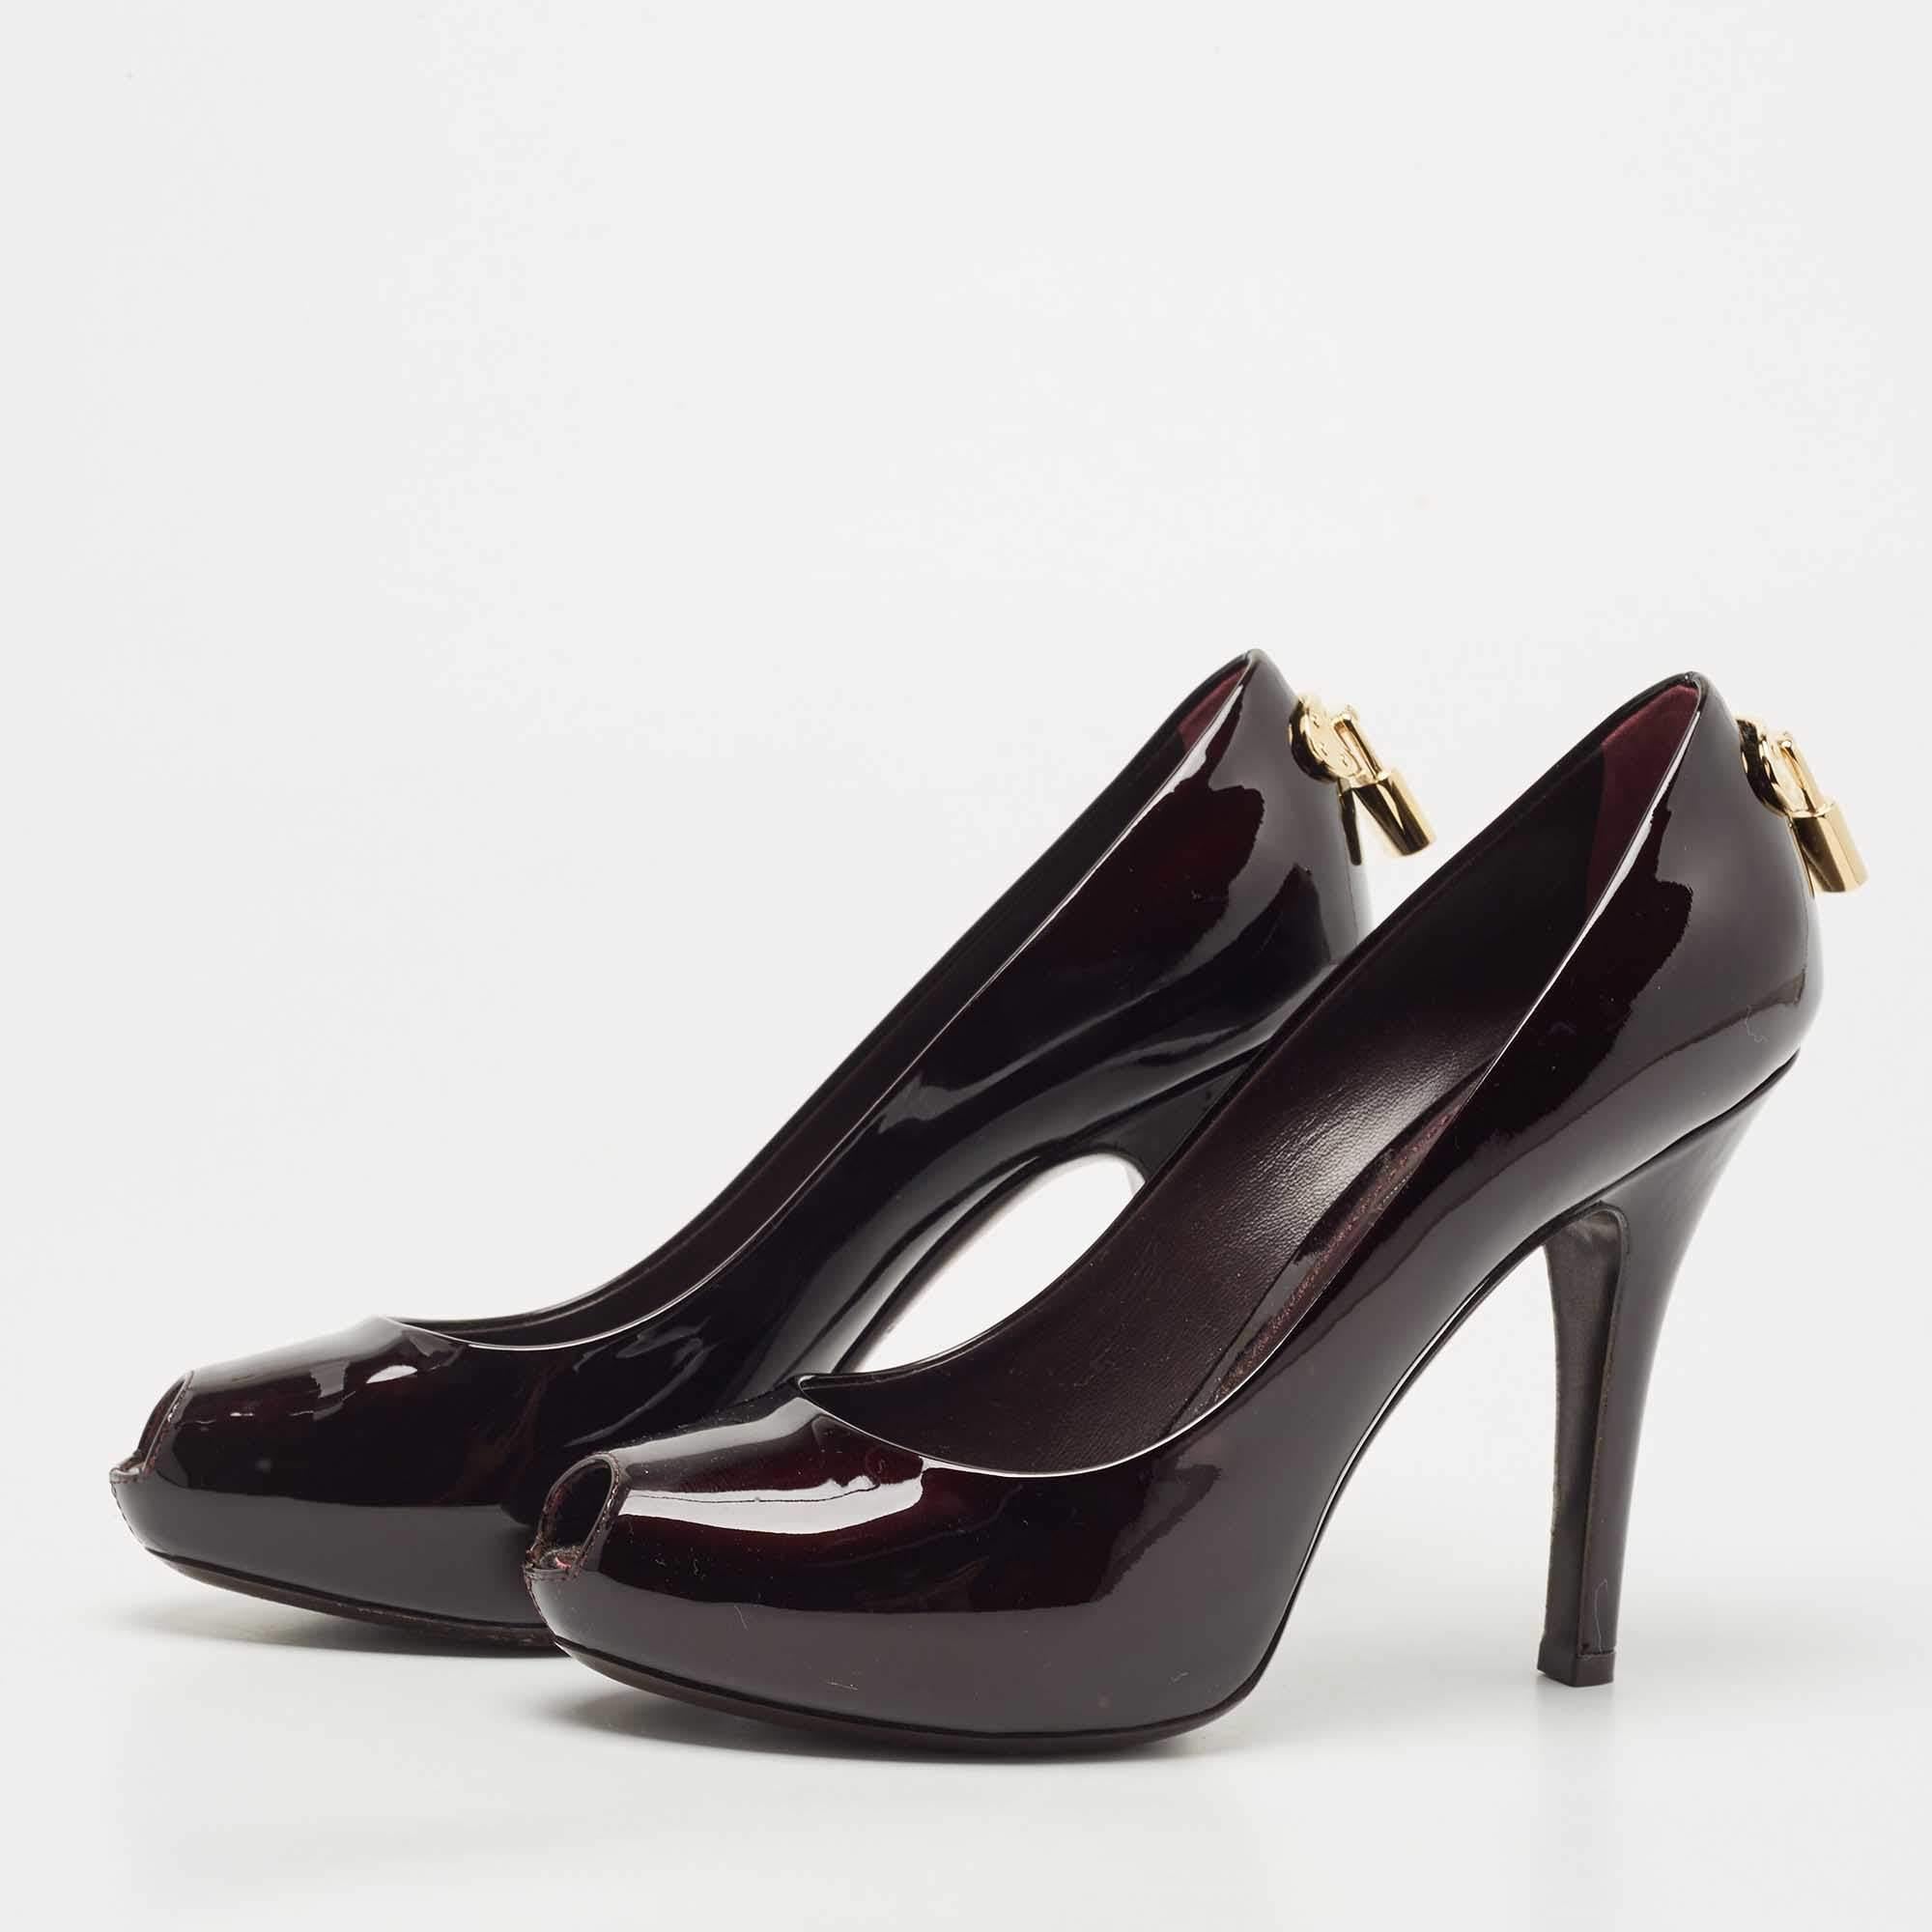 This pair of pumps is uniquely designed and makes for a distinct appearance. Created from quality materials, it is enriched with classic elements.

Includes: Original Dustbag